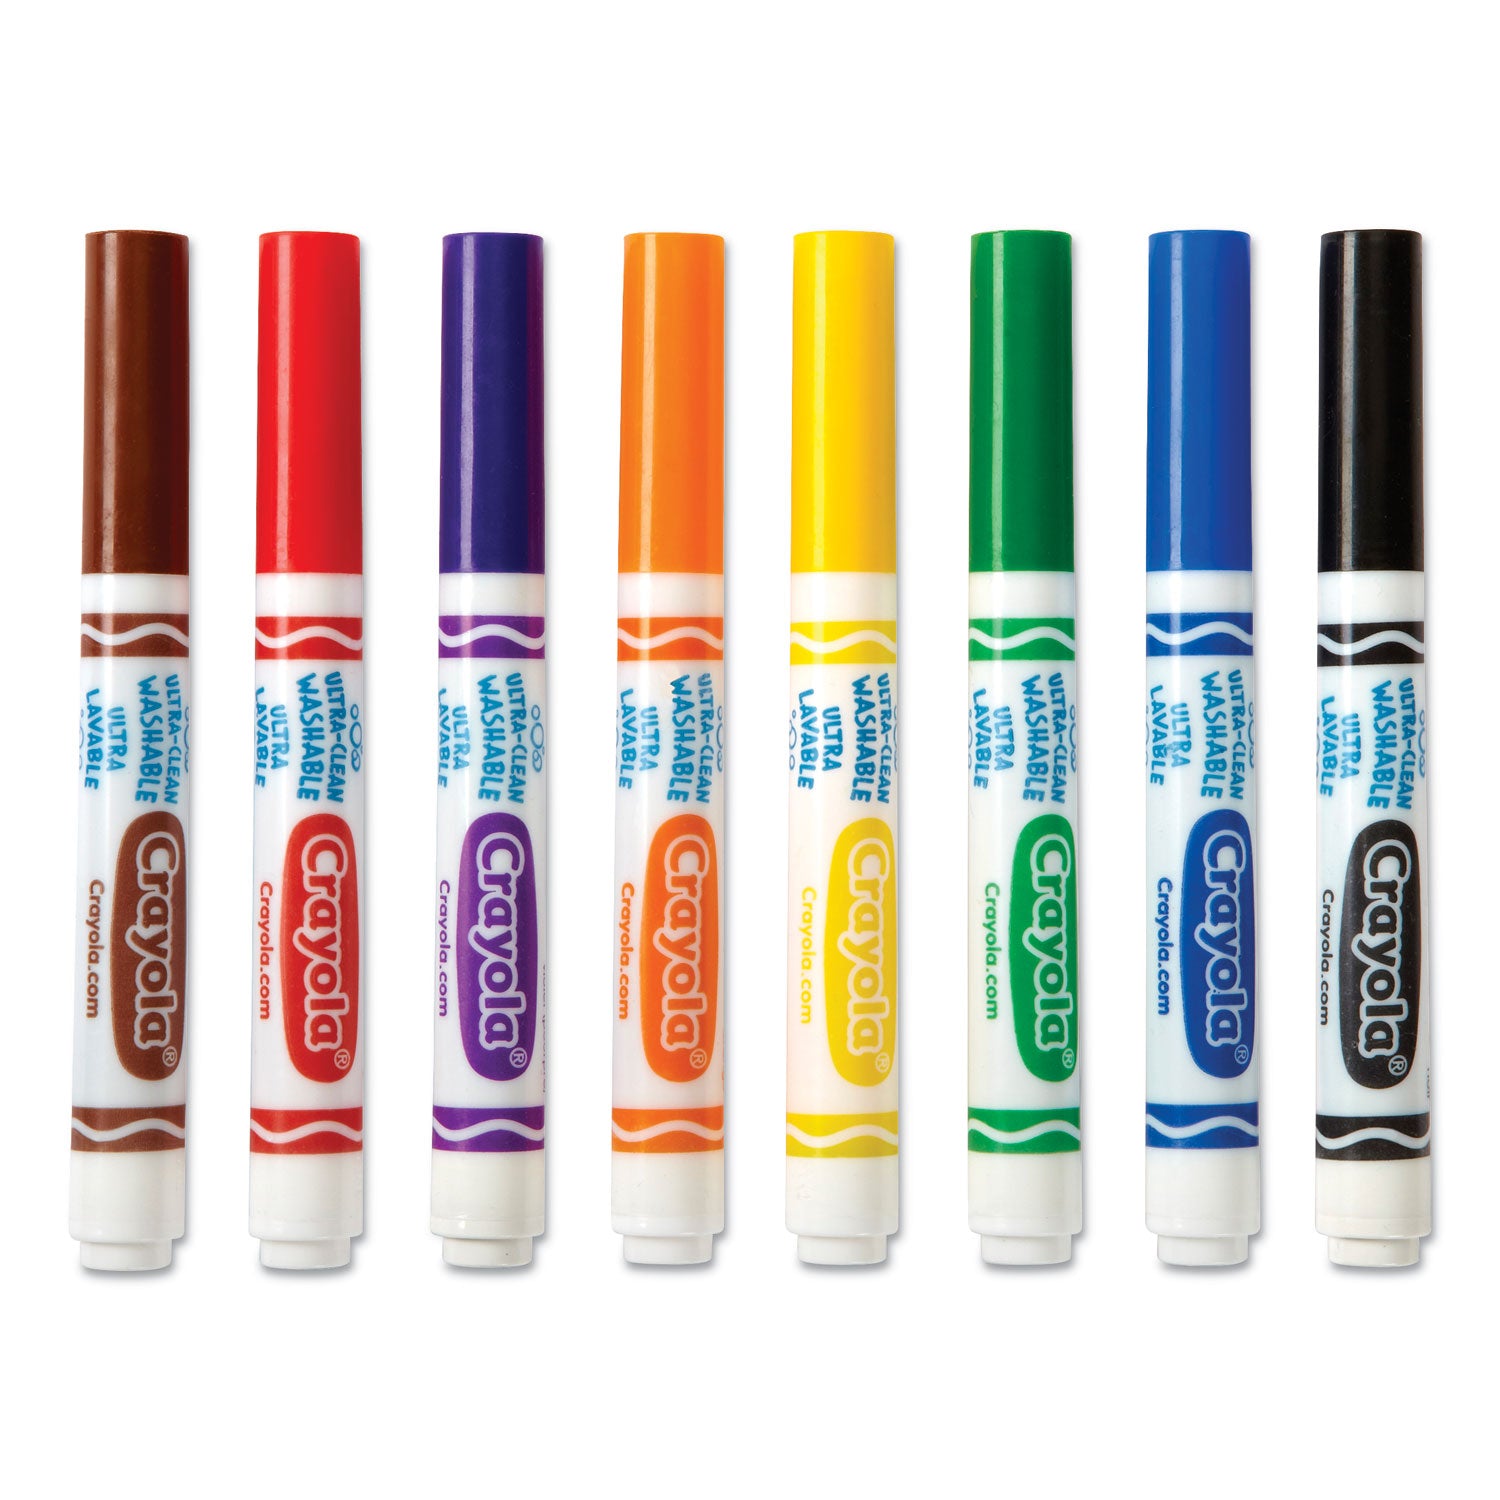 ultra-clean-washable-markers-fine-broad-wedge-chisel-tips-assorted-colors-8-box_cyo587208 - 5